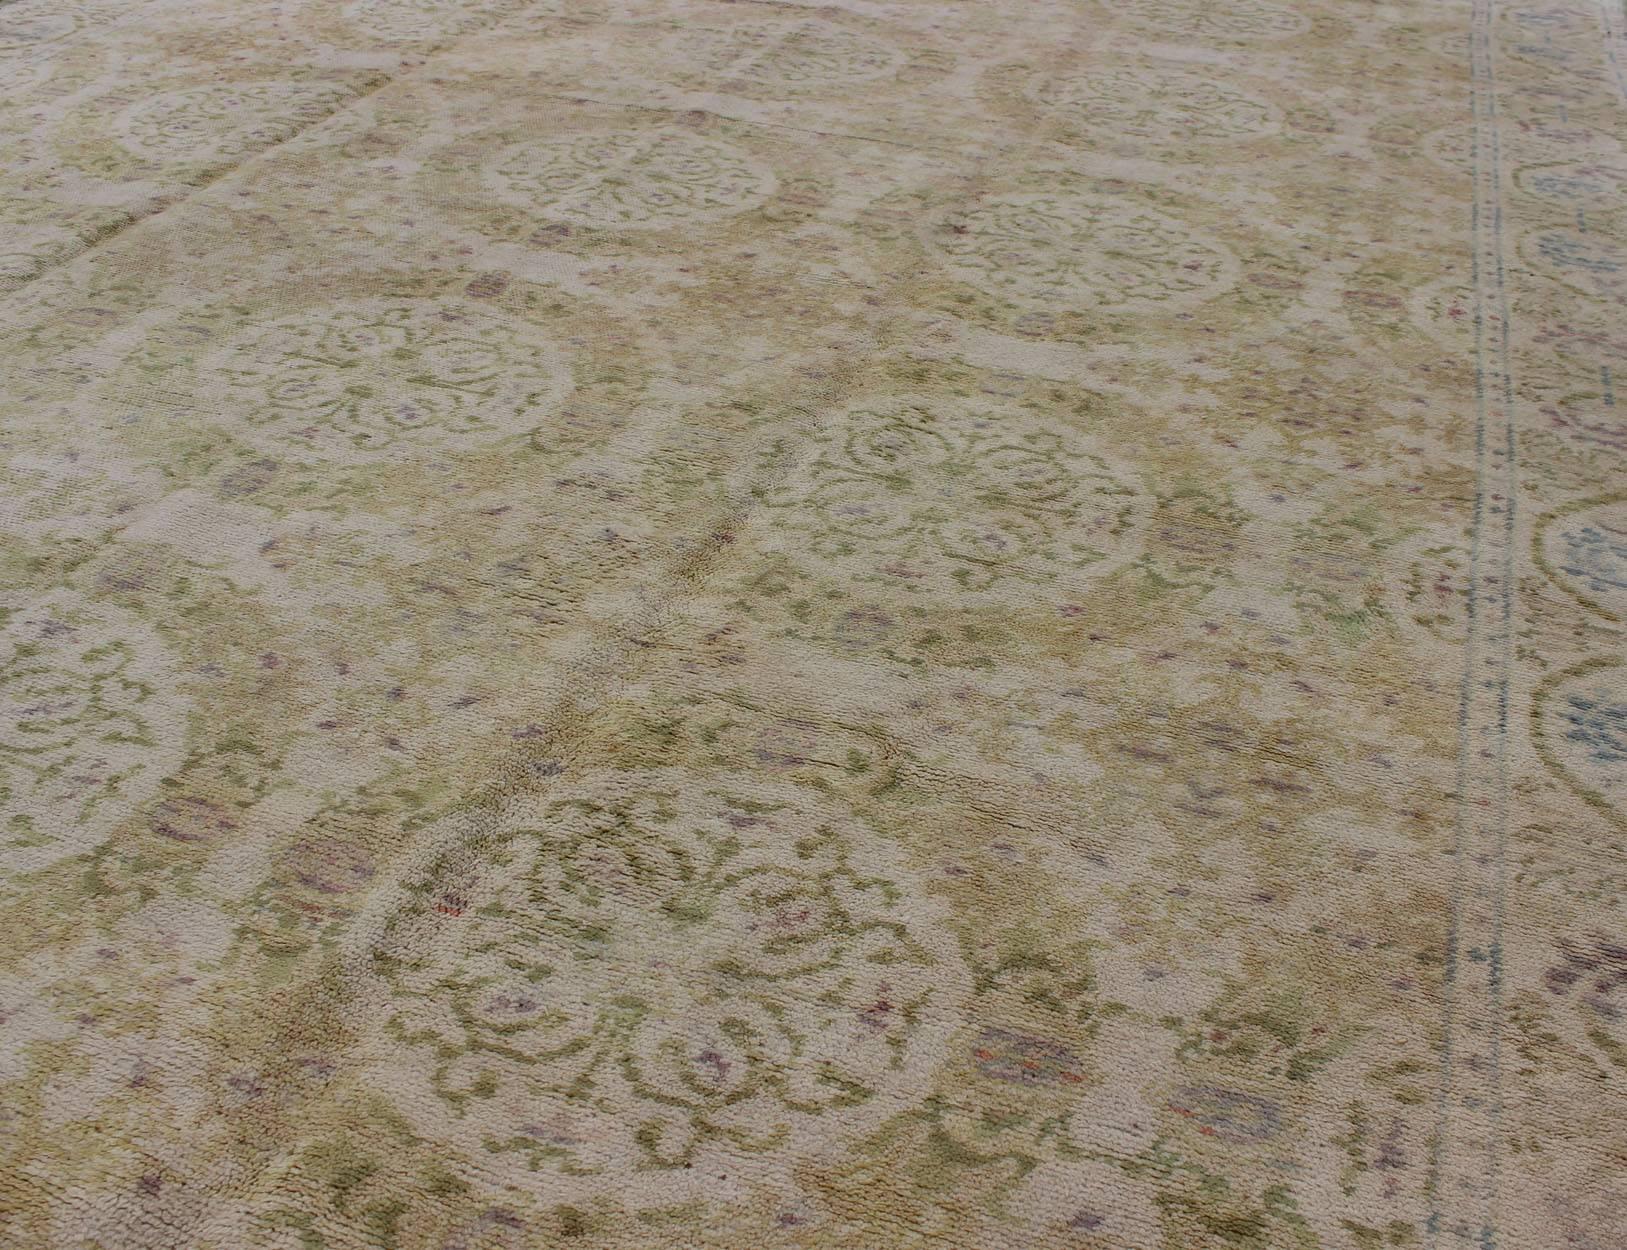 Antique Spanish Carpet in Yellow Green, Ivory and Lavender In Good Condition For Sale In Atlanta, GA